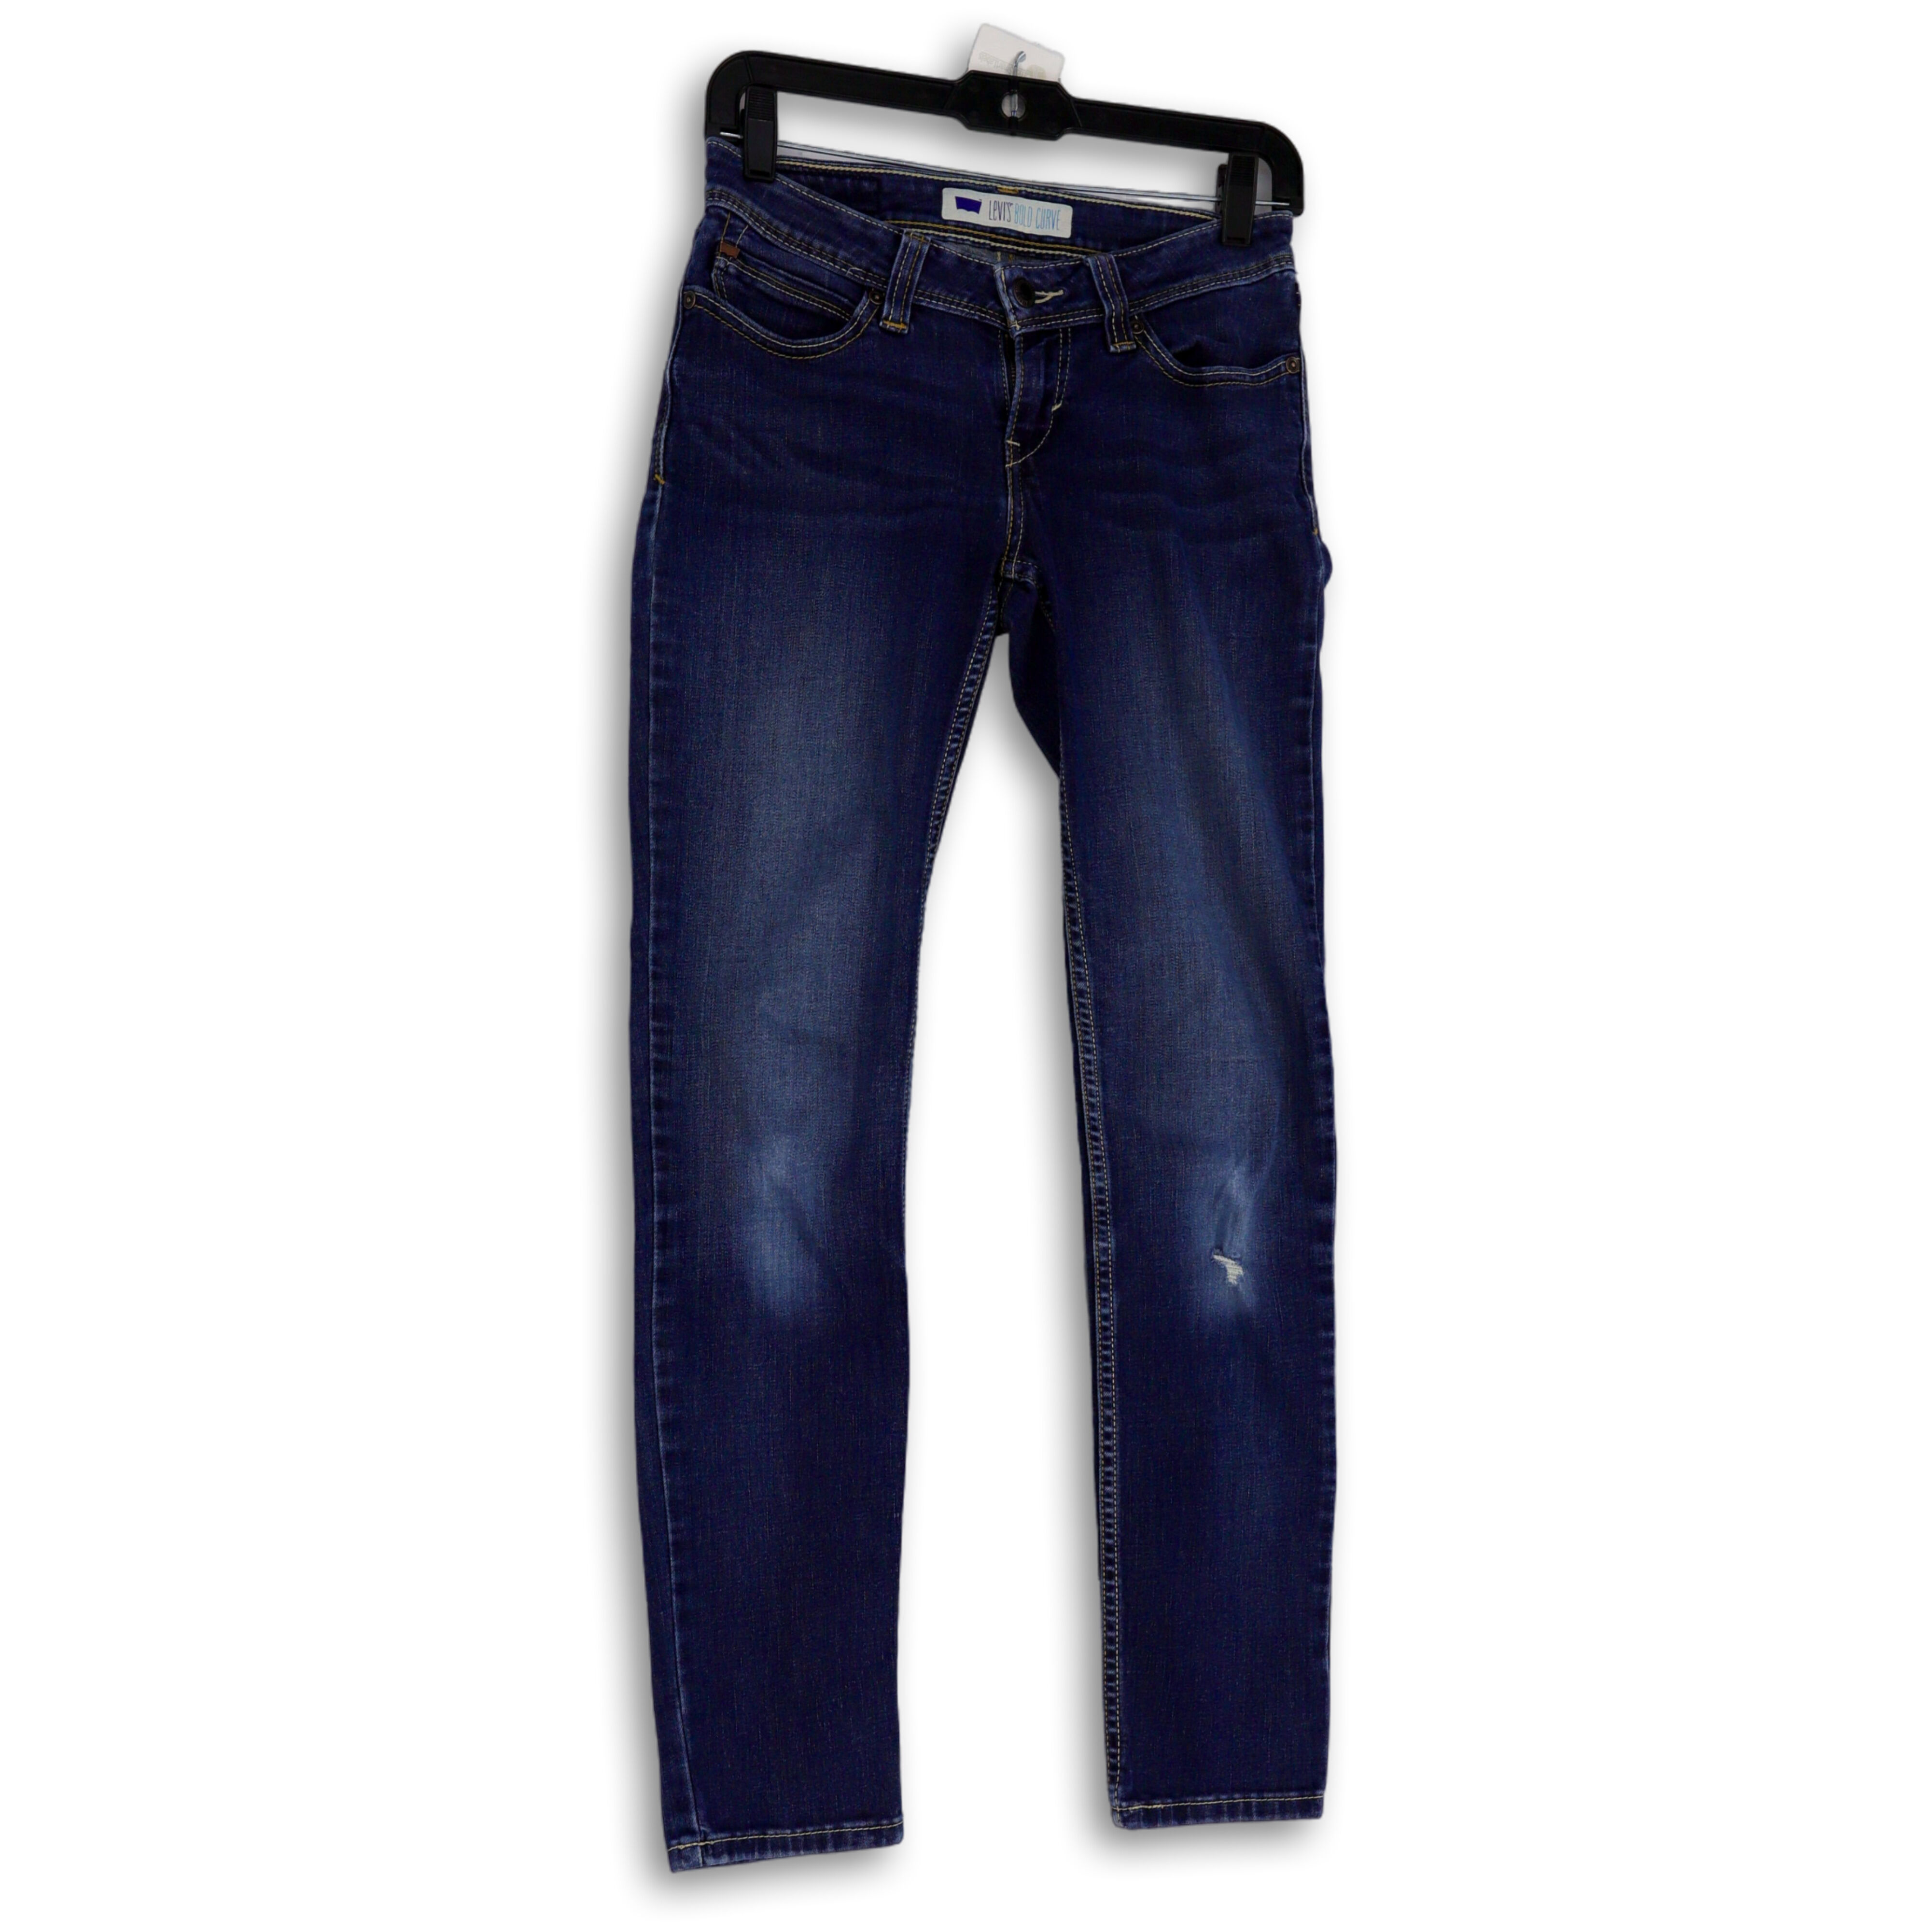 Aggregate more than 165 bold curve skinny jeans super hot